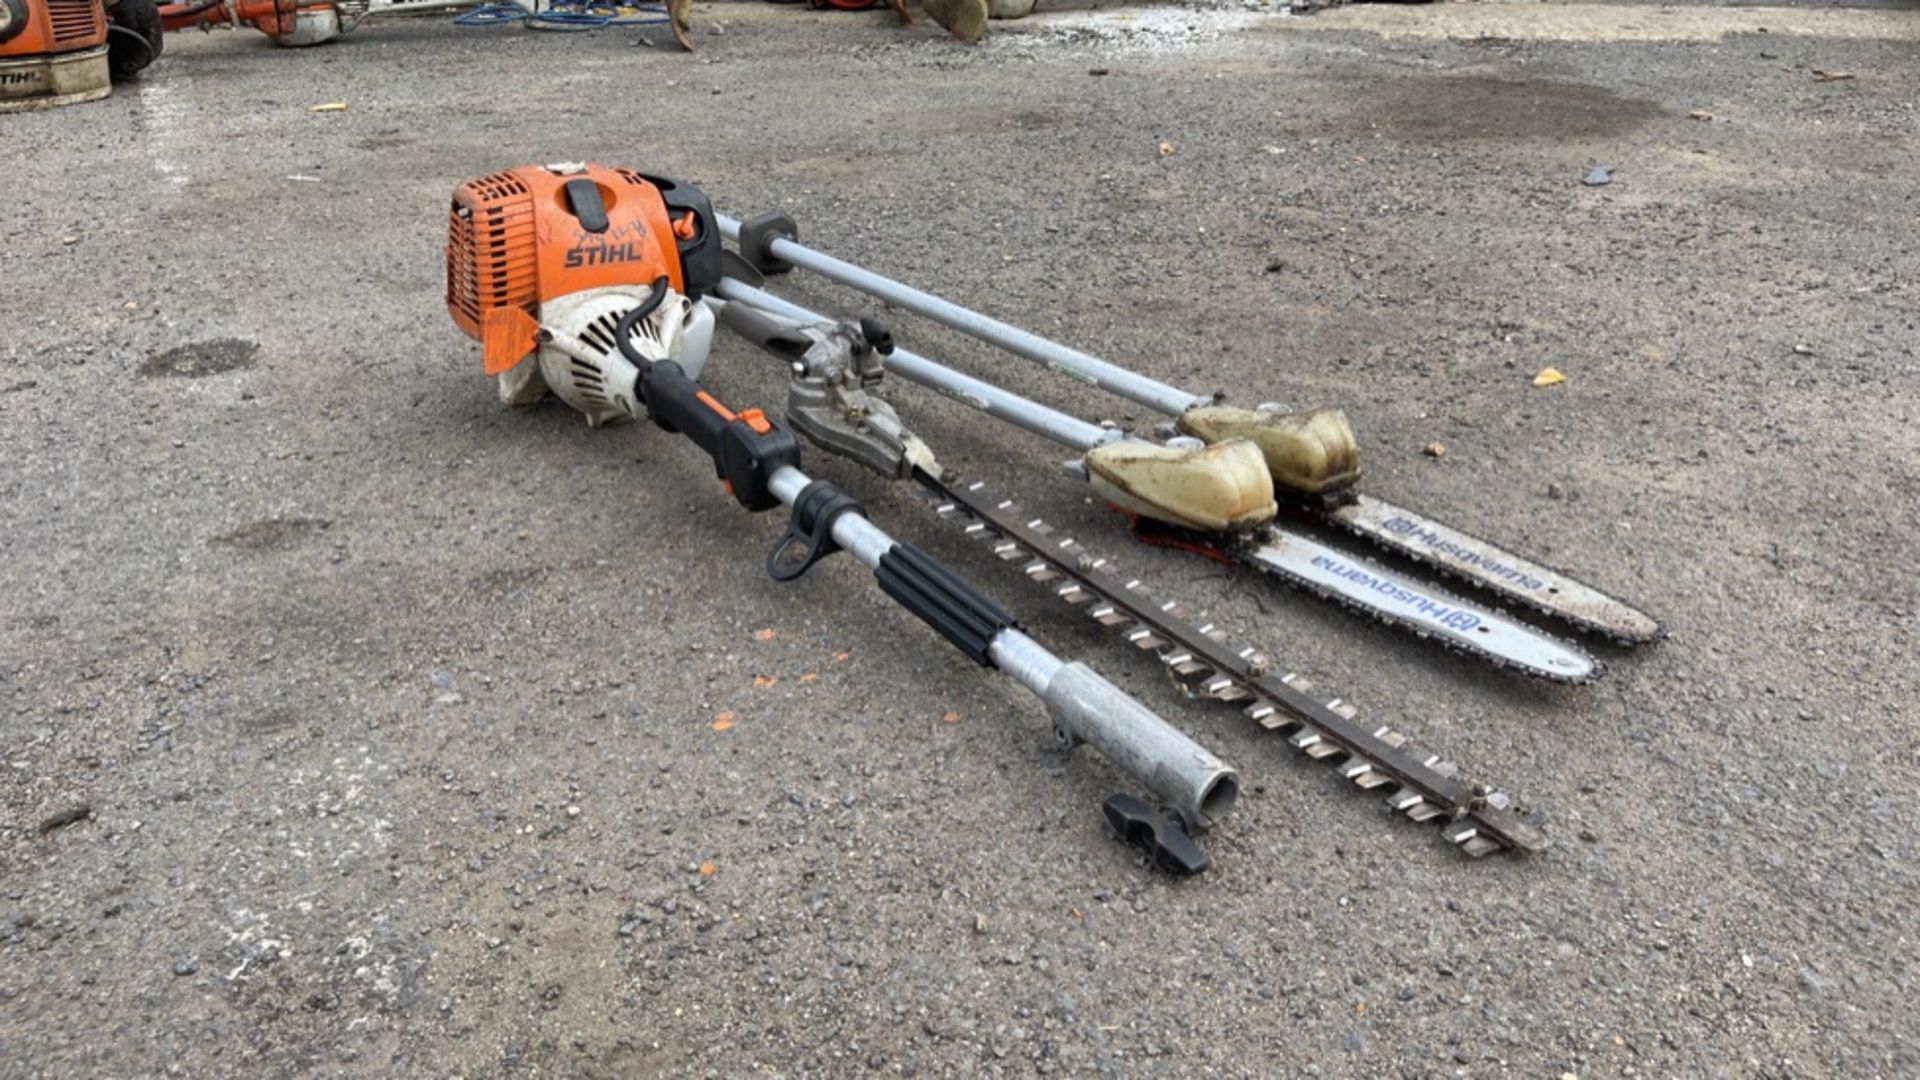 STIHL LONG REACH PETROL TRIMMER WITH ATTACHED HEADS *NON-RUNNER - FOR SPARES OR REPAIR ONLY*